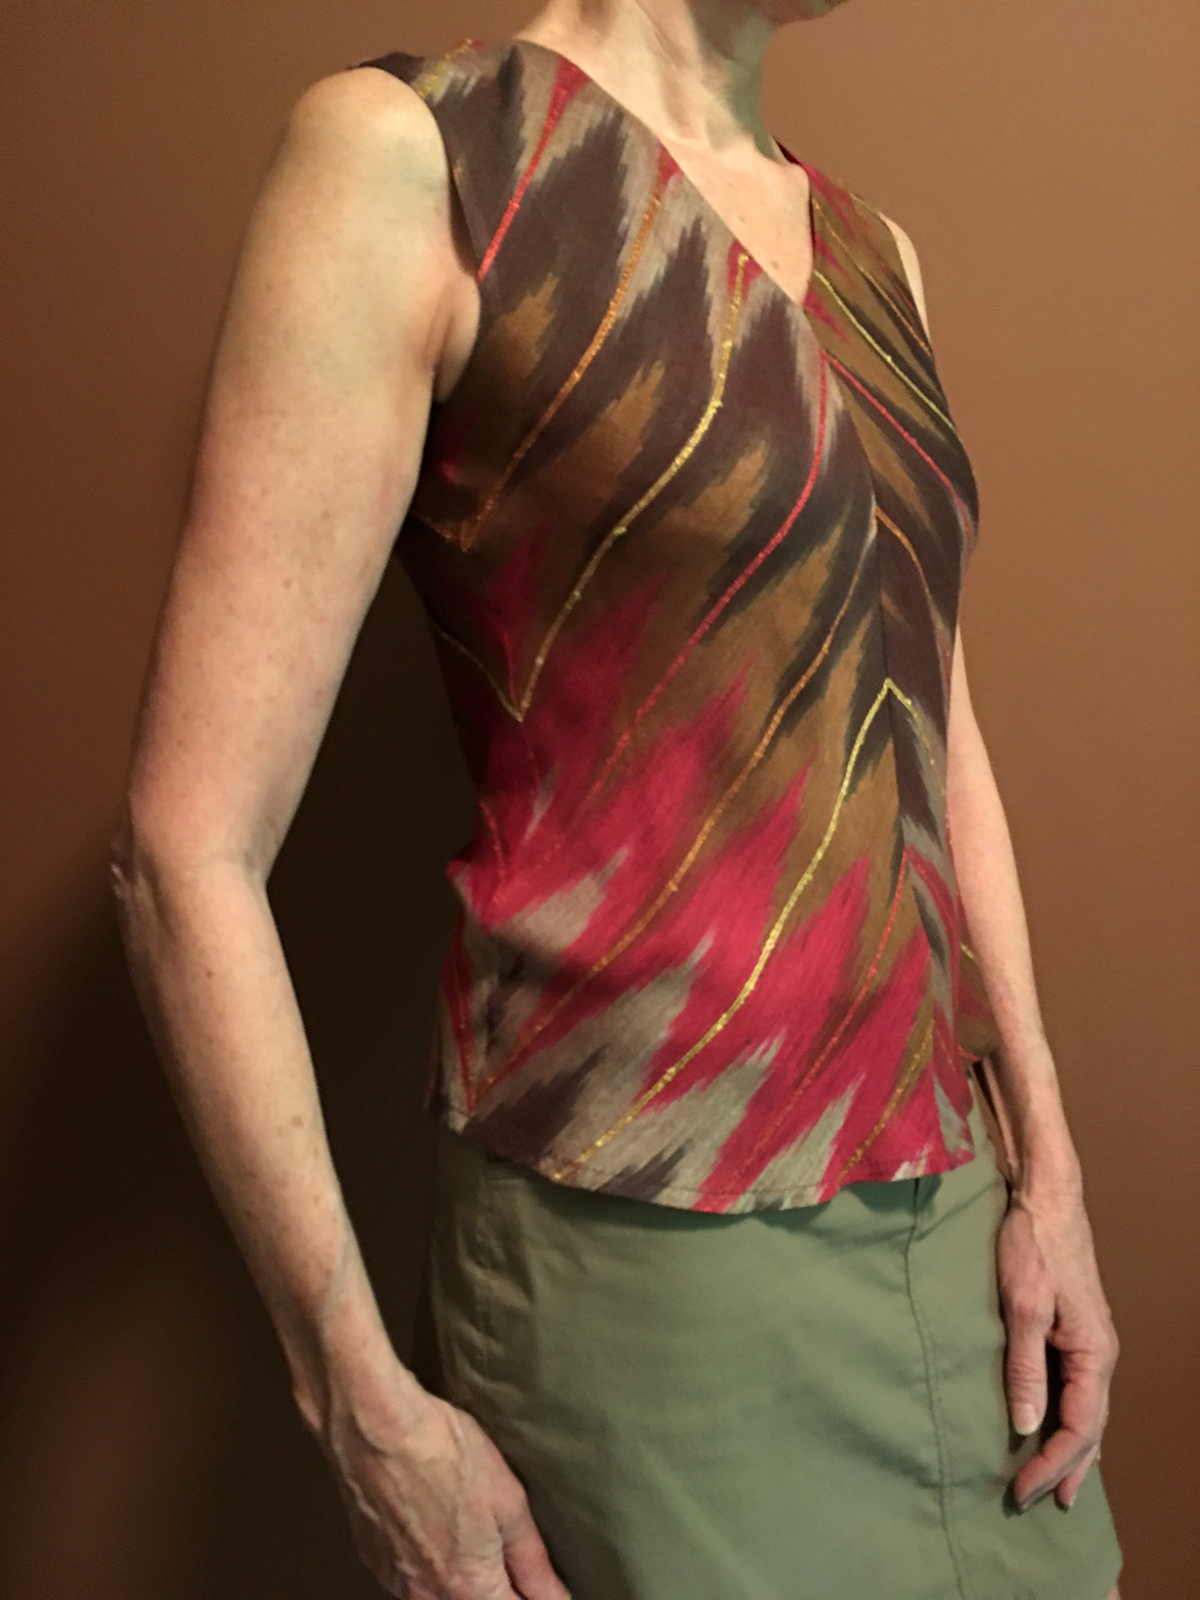 An at home fabric source--a no-longer-worn striped scarf--was turned into a sleeveless top